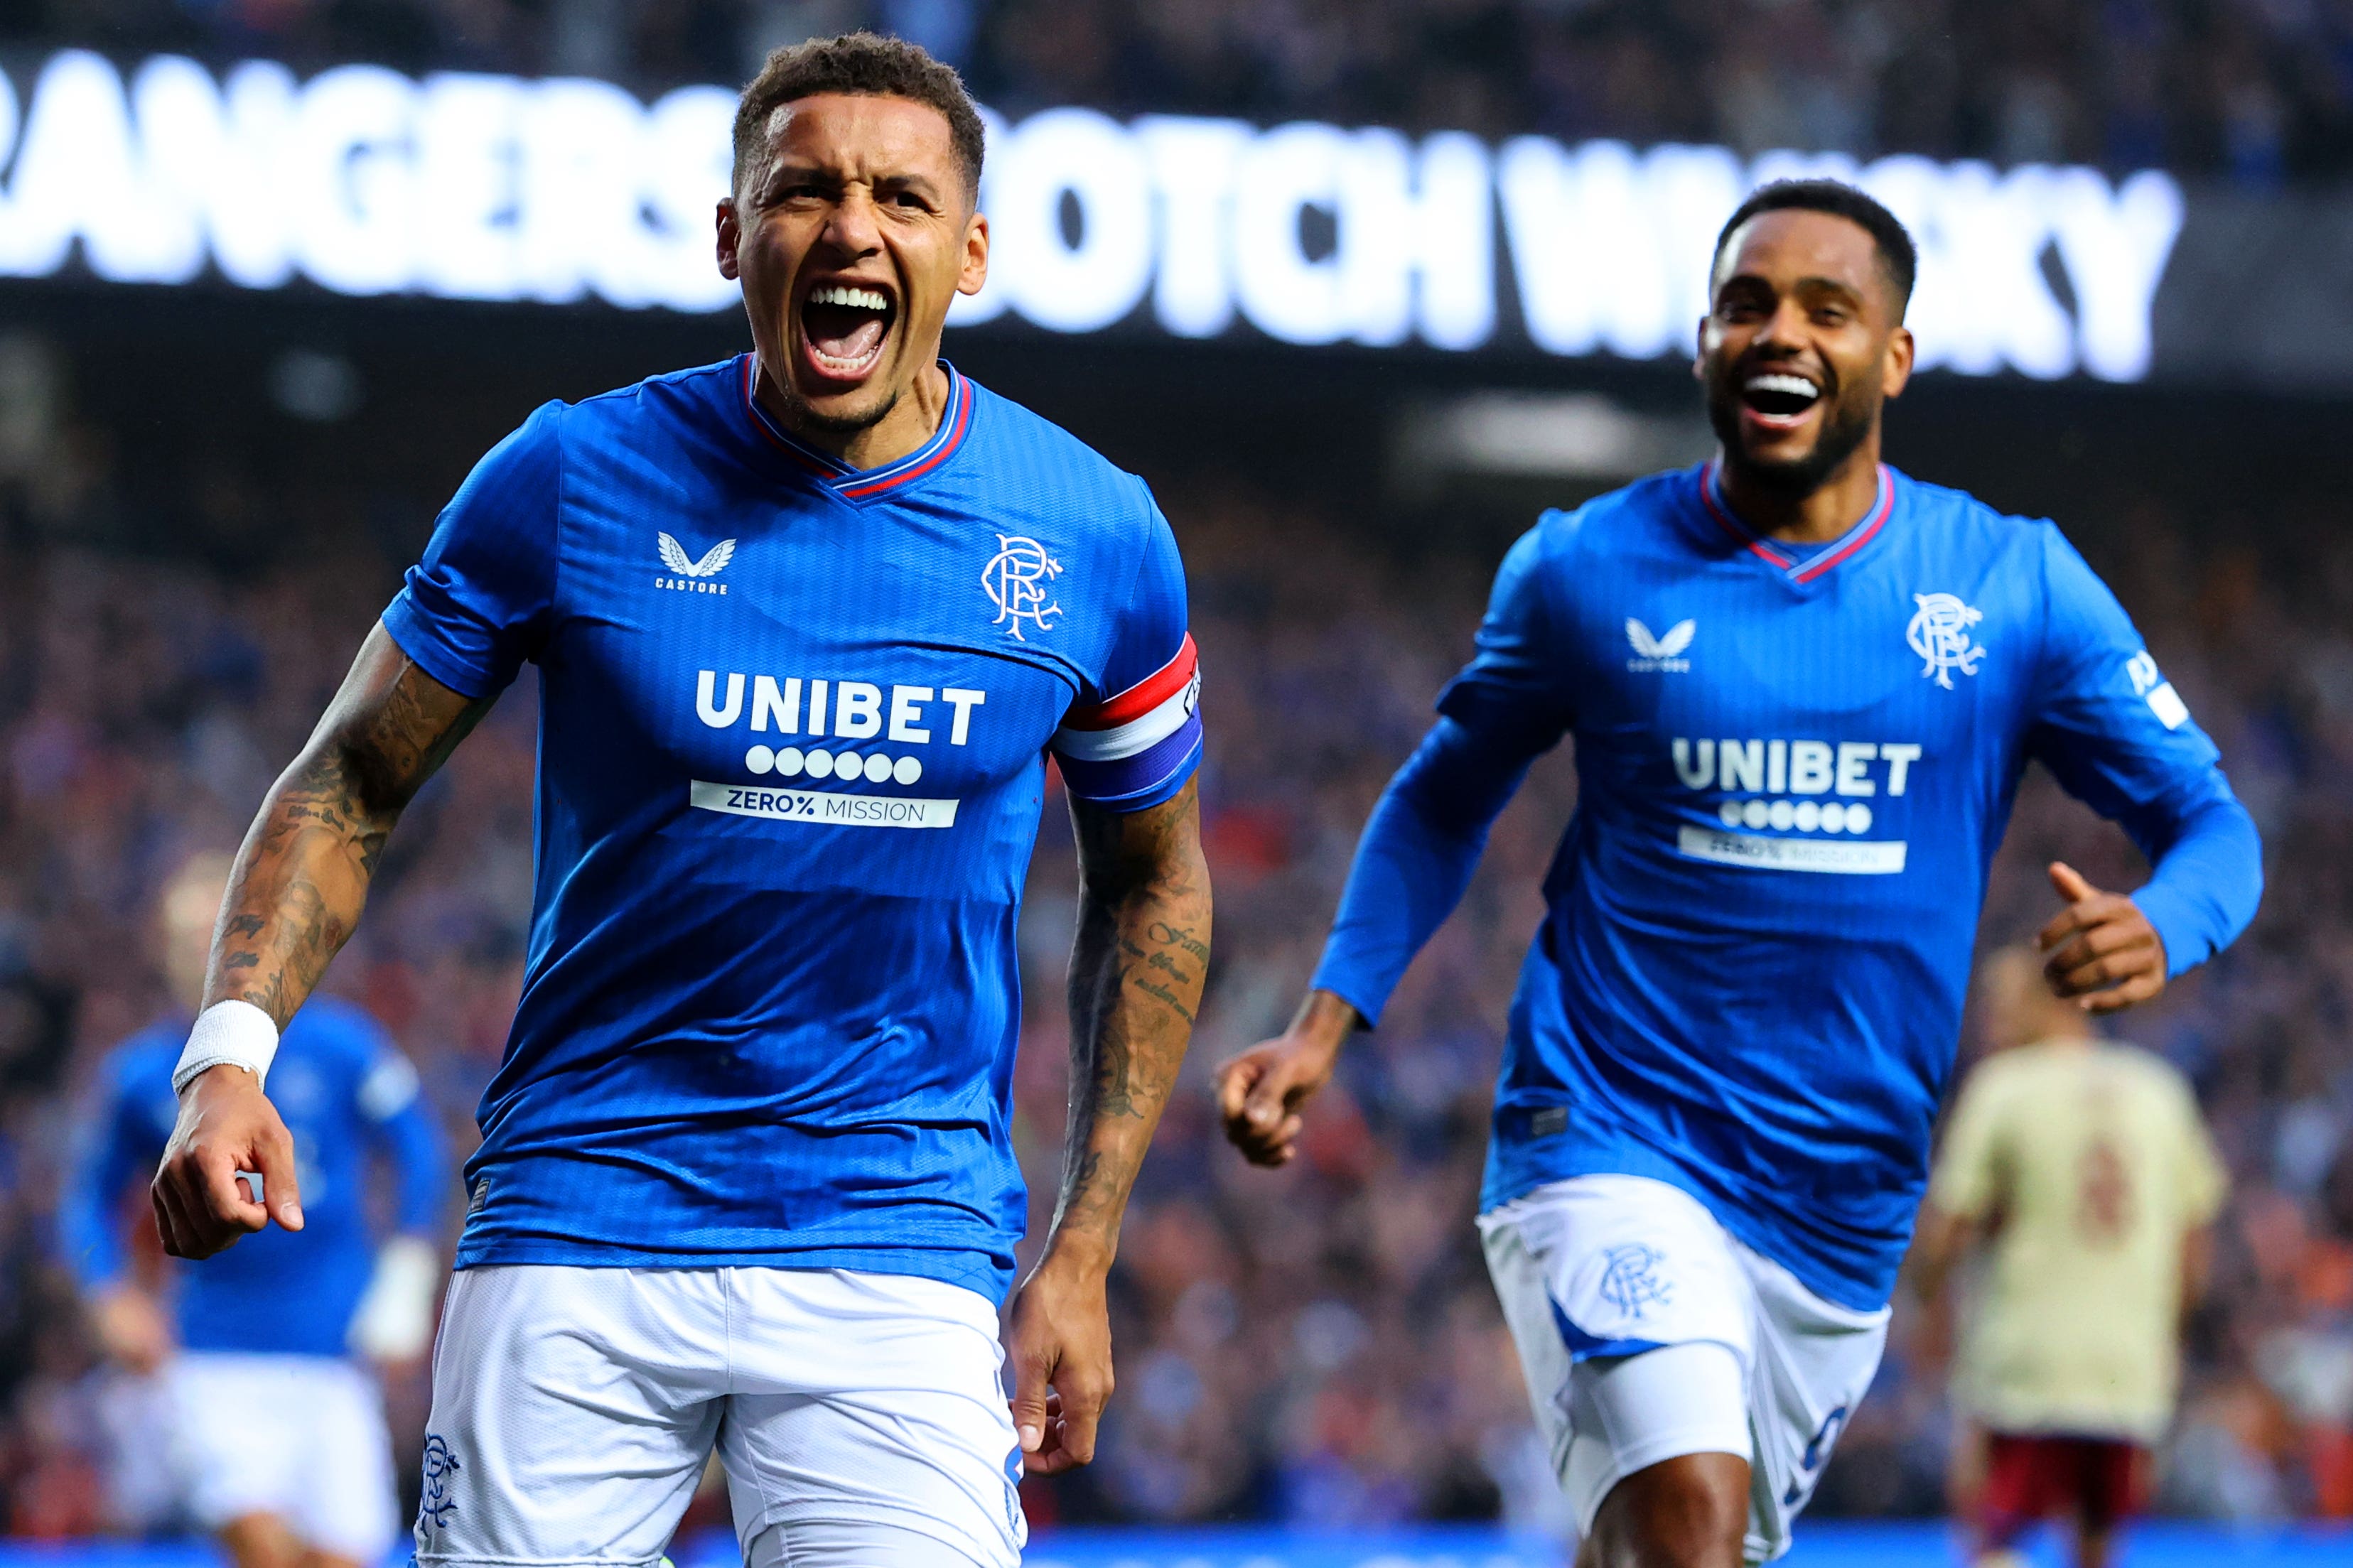 Wasteful' Rangers left with work to do after narrow win over Servette | The Independent